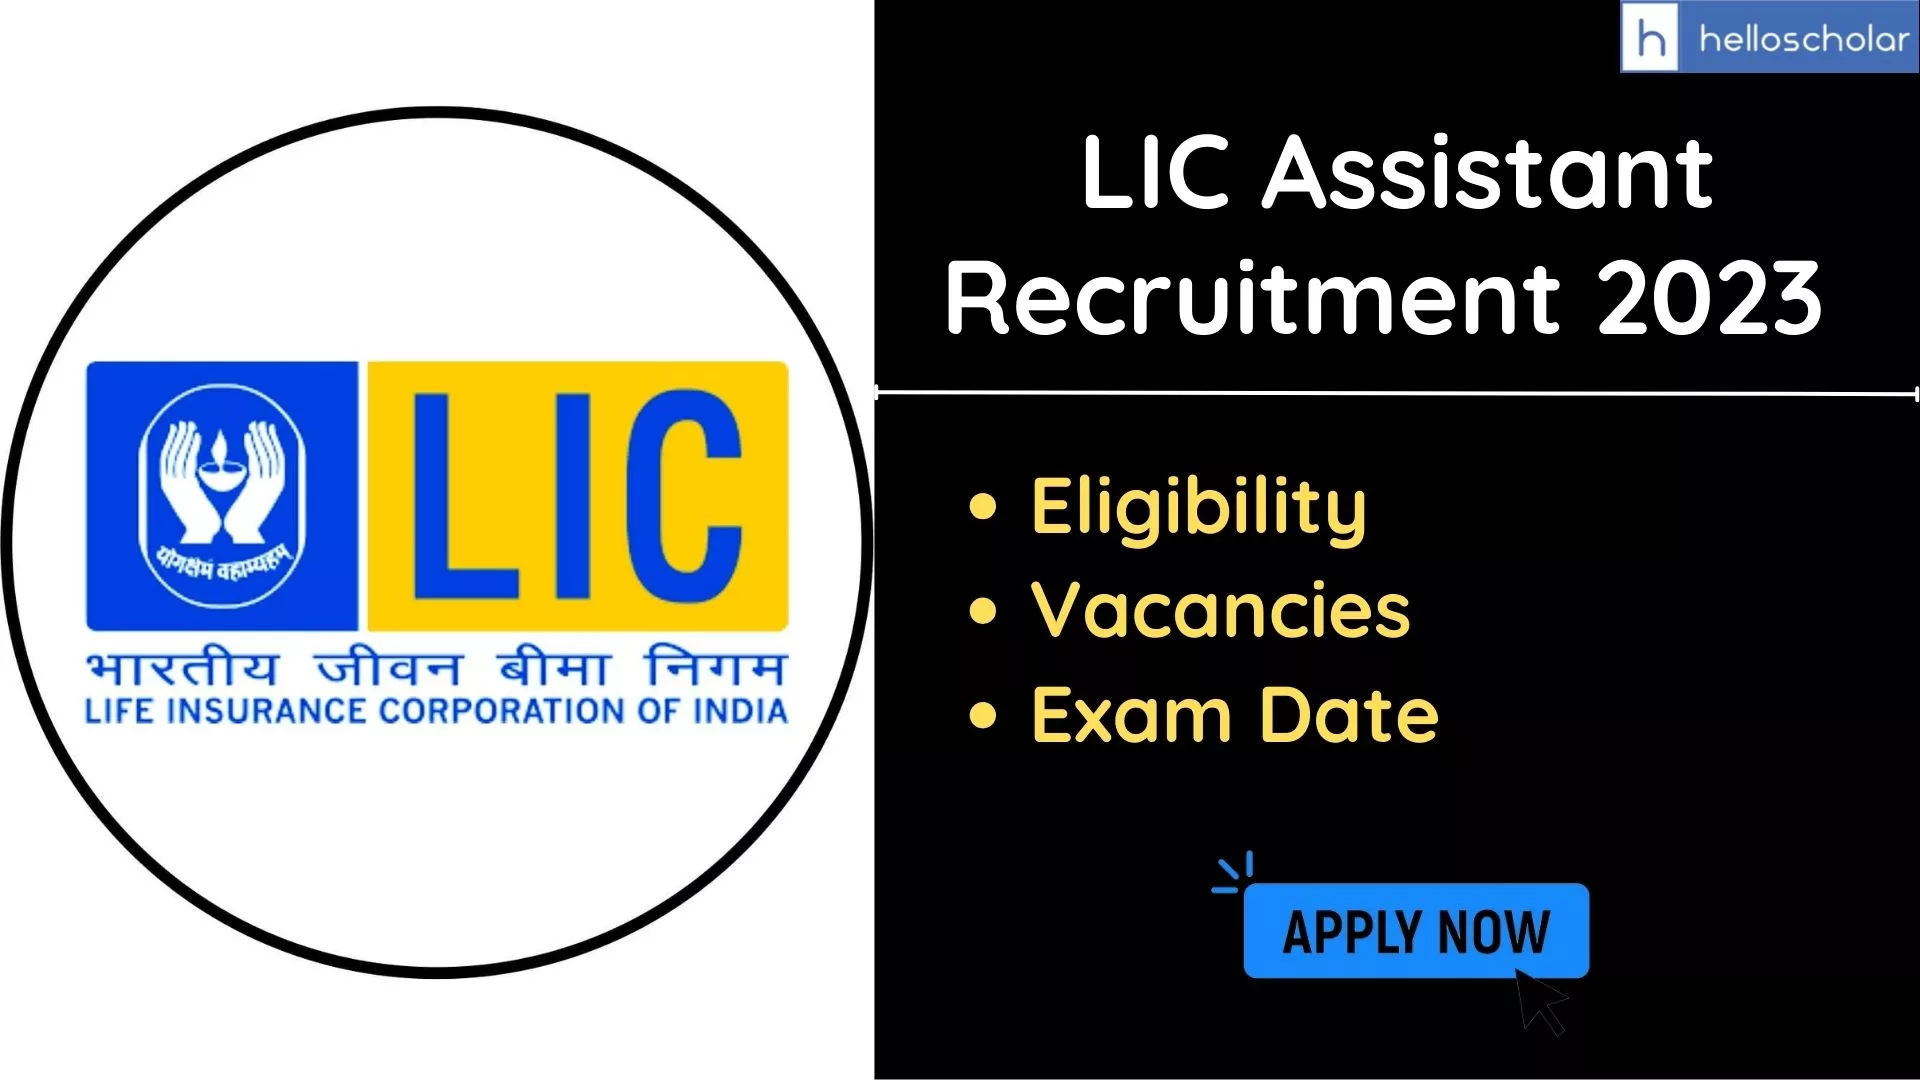 LIC Assistant Recruitment 2023 Notification, Check Vacancies, Eligibility, Exam Date, Apply Online